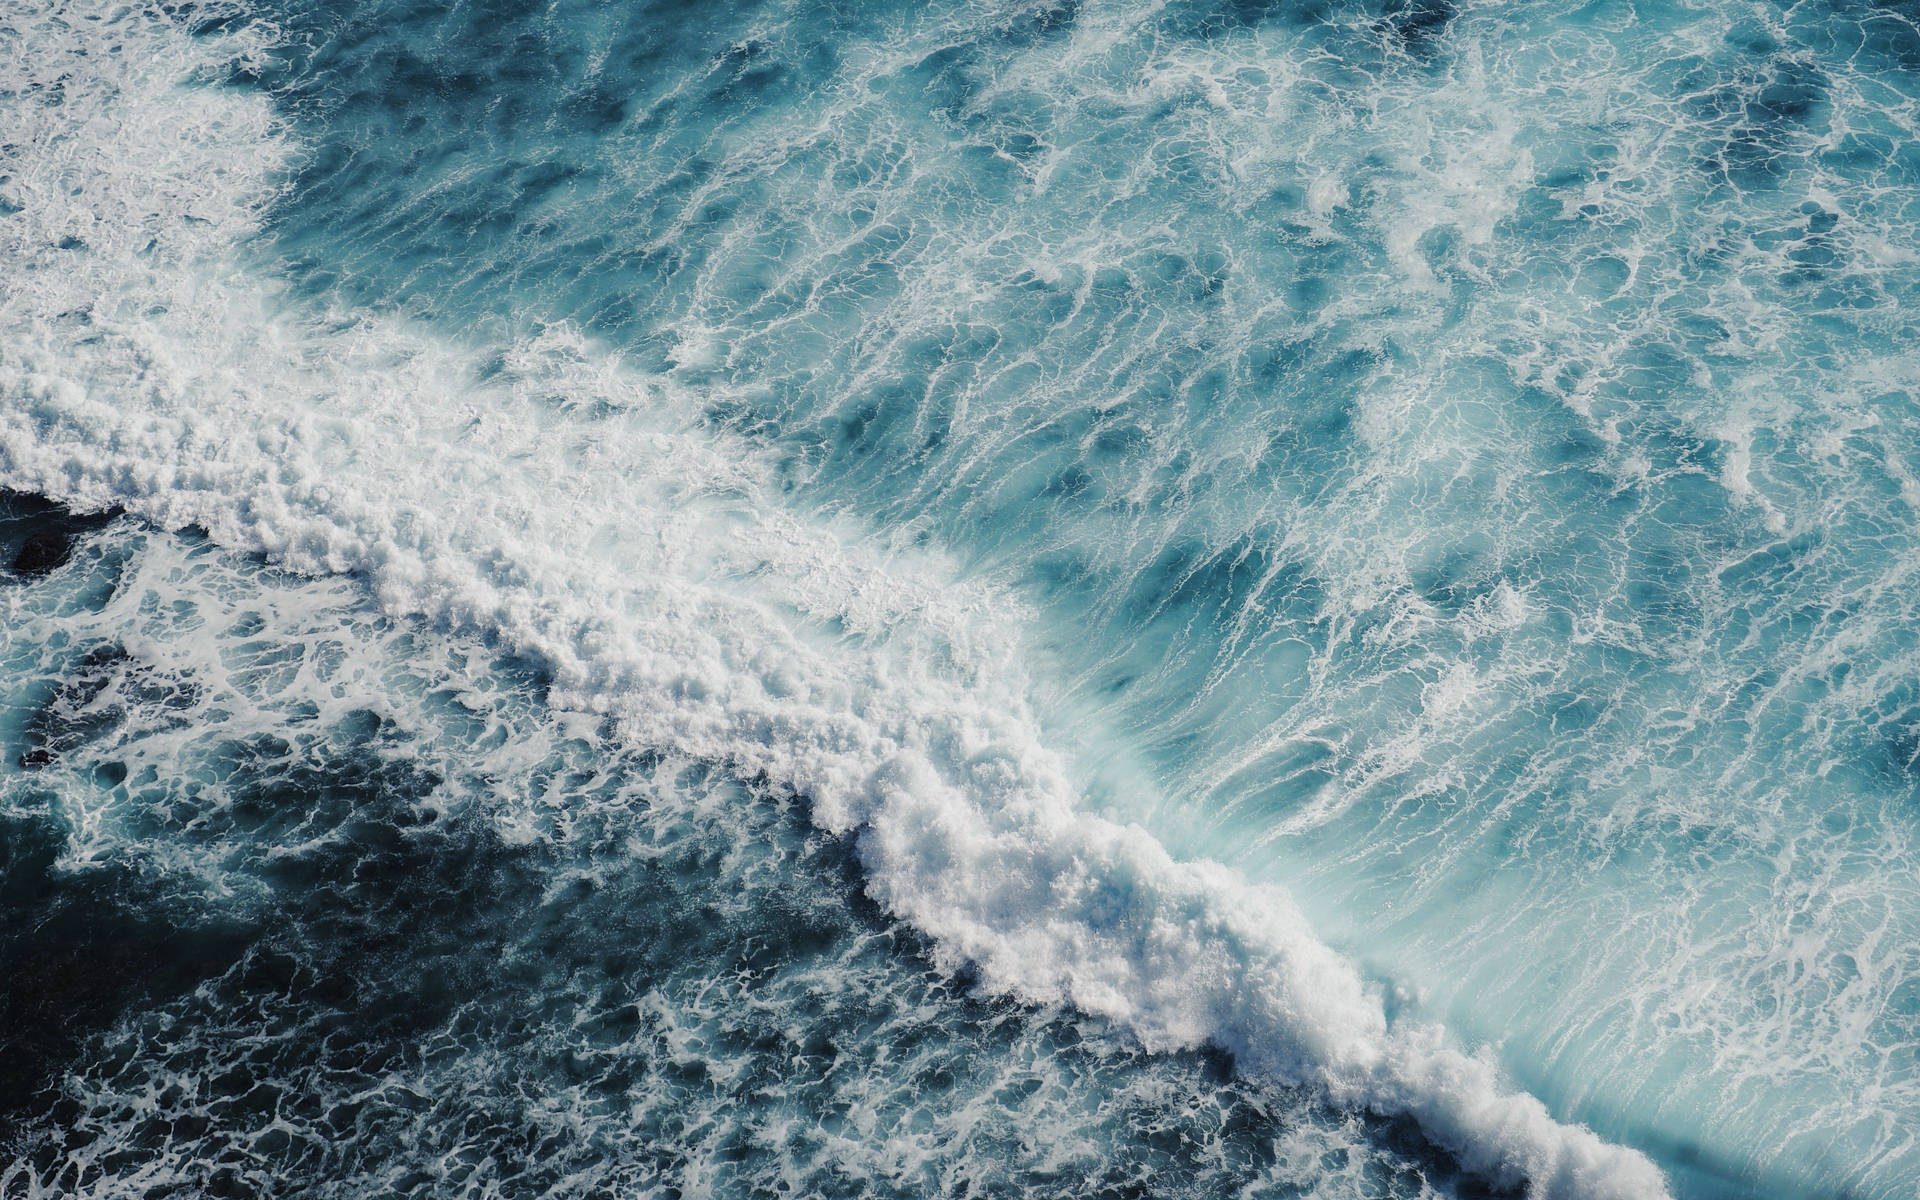 Waves, Beach, And Sea Background Wallpaper